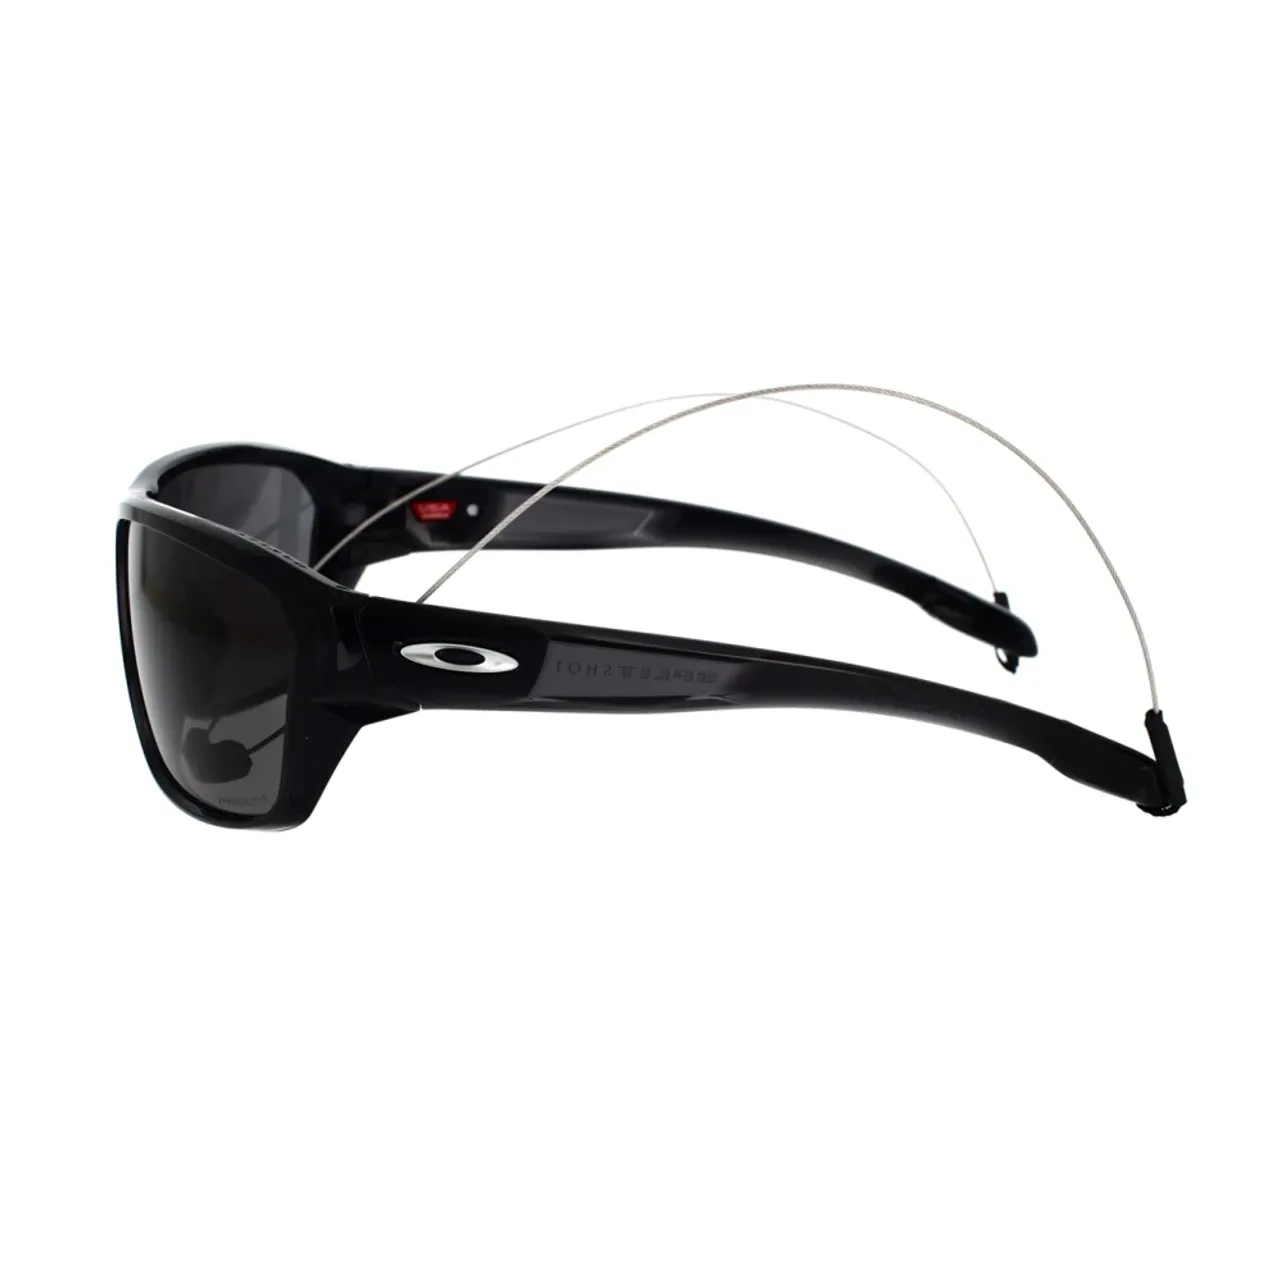 Oakley , Sporty Sunglasses with Enhanced Vision ,Black unisex, Sizes: 64 MM